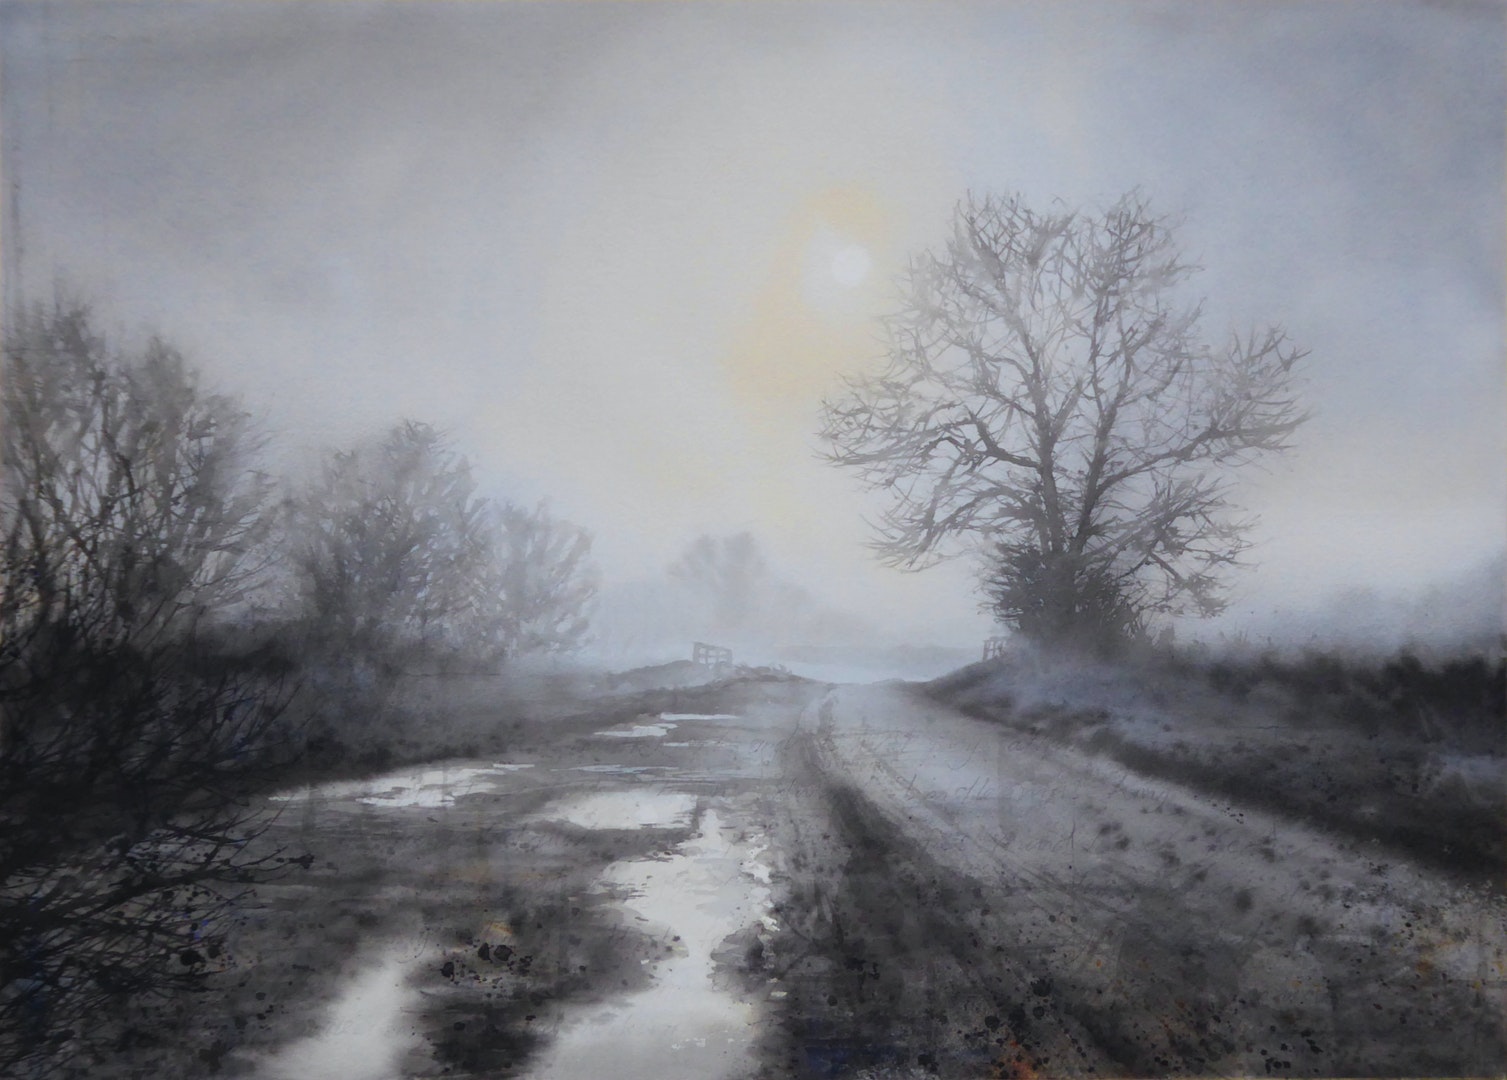 'Puddles in the lane', Gary Cook, Ink, watercolour and charcoal on paper, 68 x 50 cm